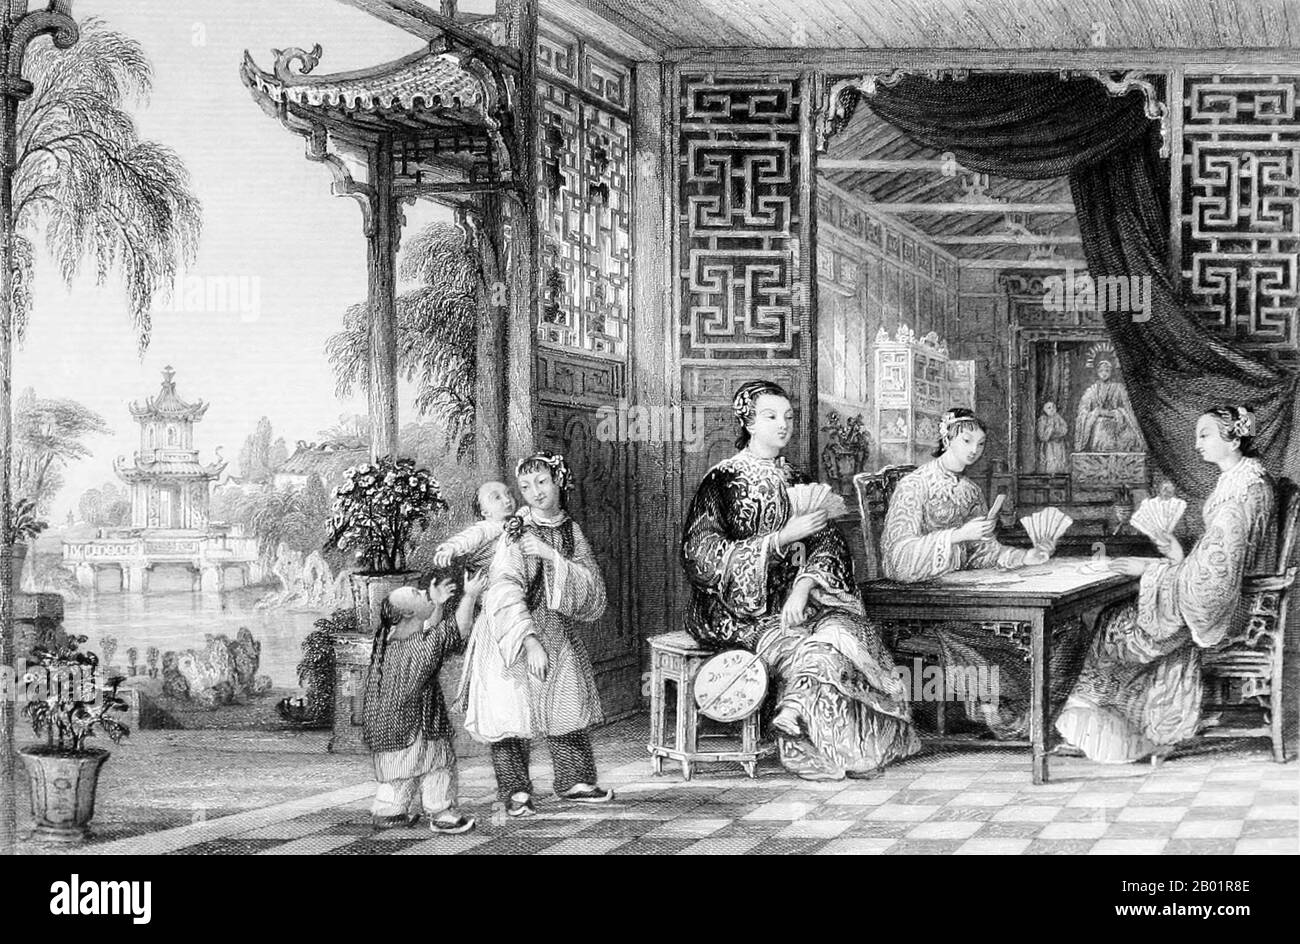 China: 'Ladies of a Mandarin's Family Playing Cards'. Engraving by Thomas Allom (13 March 1804 - 21 October 1872), c. 1843.  Thomas Allom was an English architect, artist, and topographical illustrator. He was a founding member of what became the Royal Institute of British Architects (RIBA).  He designed many buildings in London, including the Church of St Peter's and parts of the elegant Ladbroke Estate in Notting Hill. He also worked with Sir Charles Barry on numerous projects, most notably the Houses of Parliament, and is also known for his numerous topographical works. Stock Photo